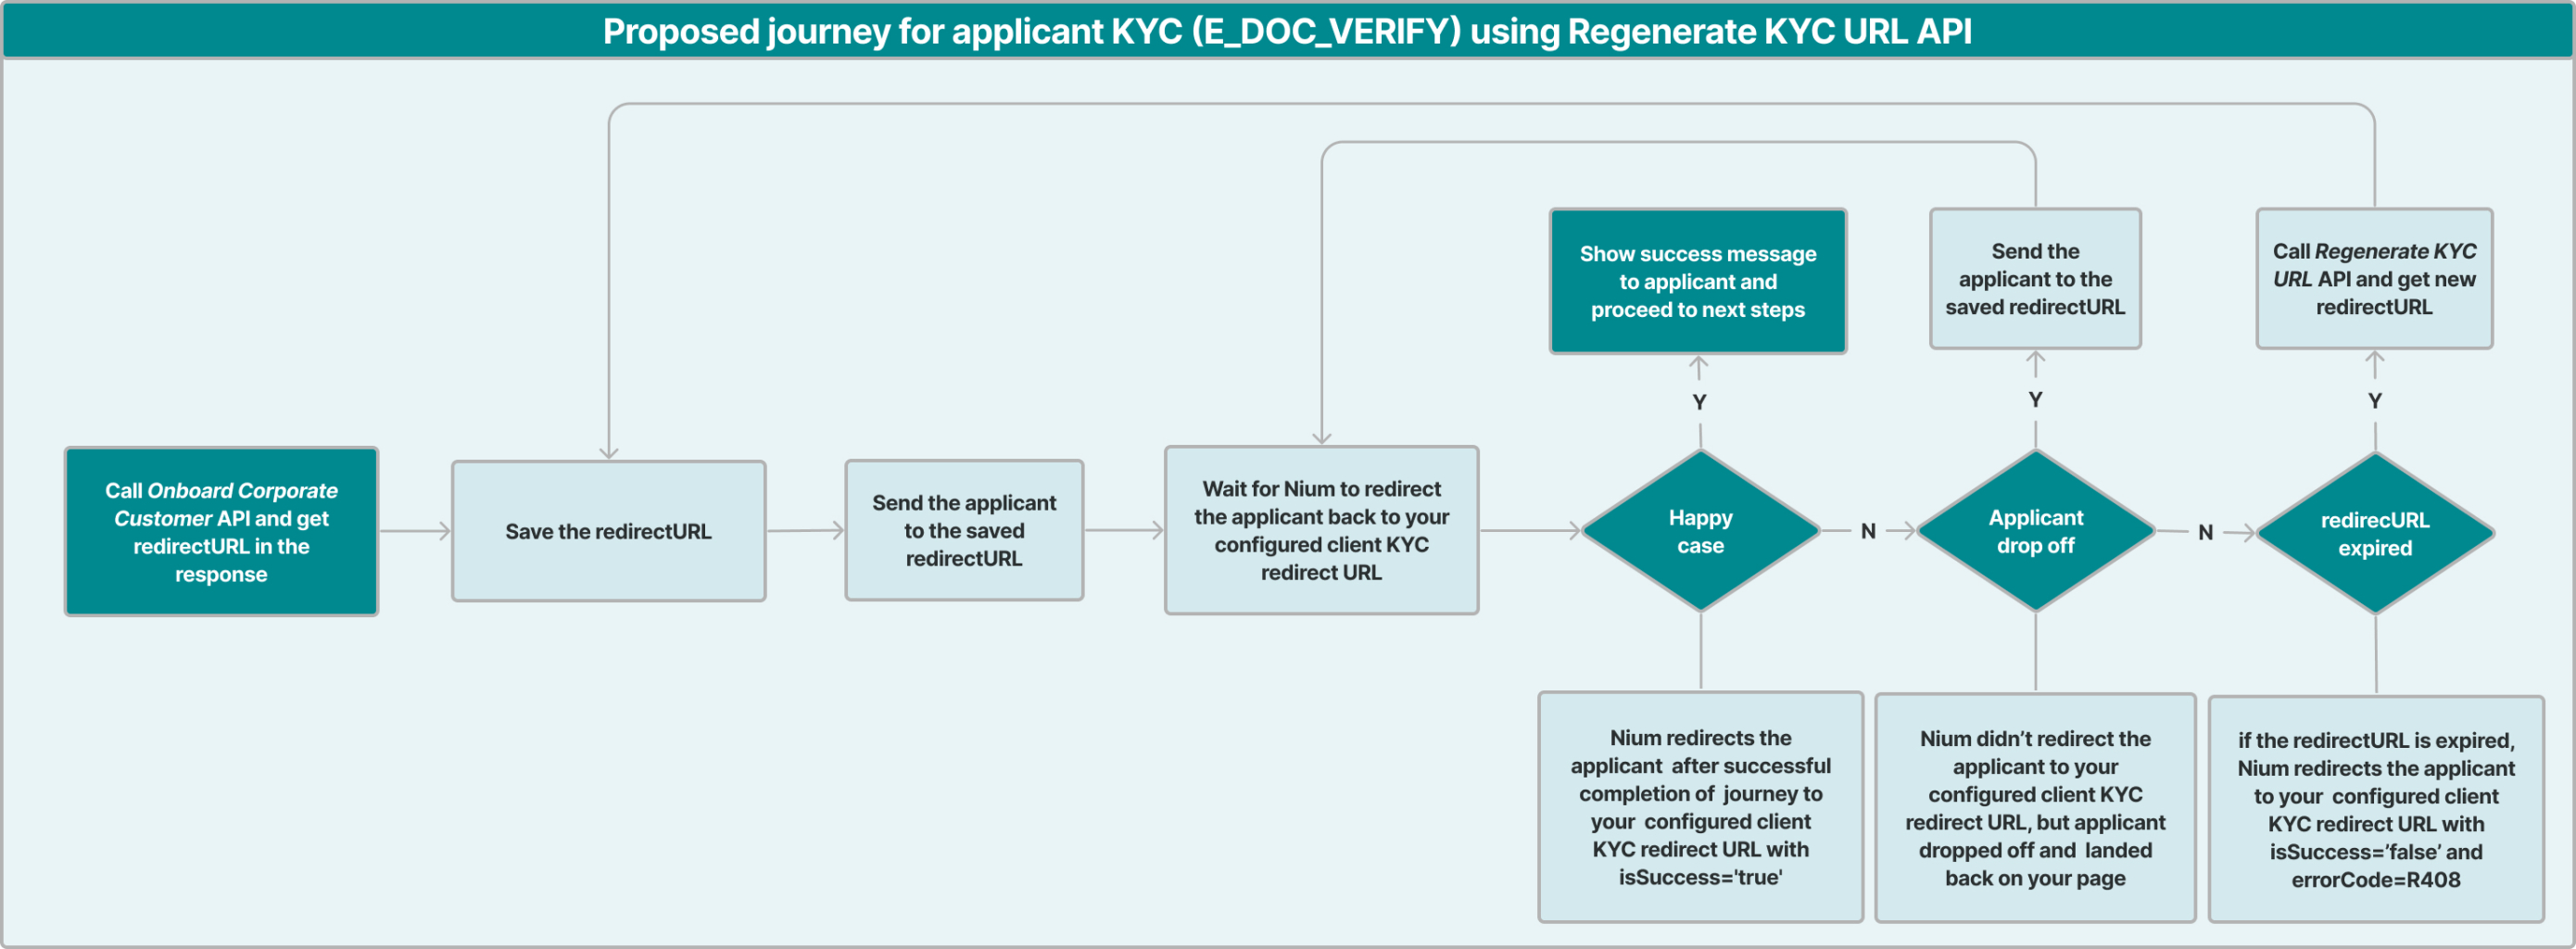 An image of the proposed journey for applicant KYC